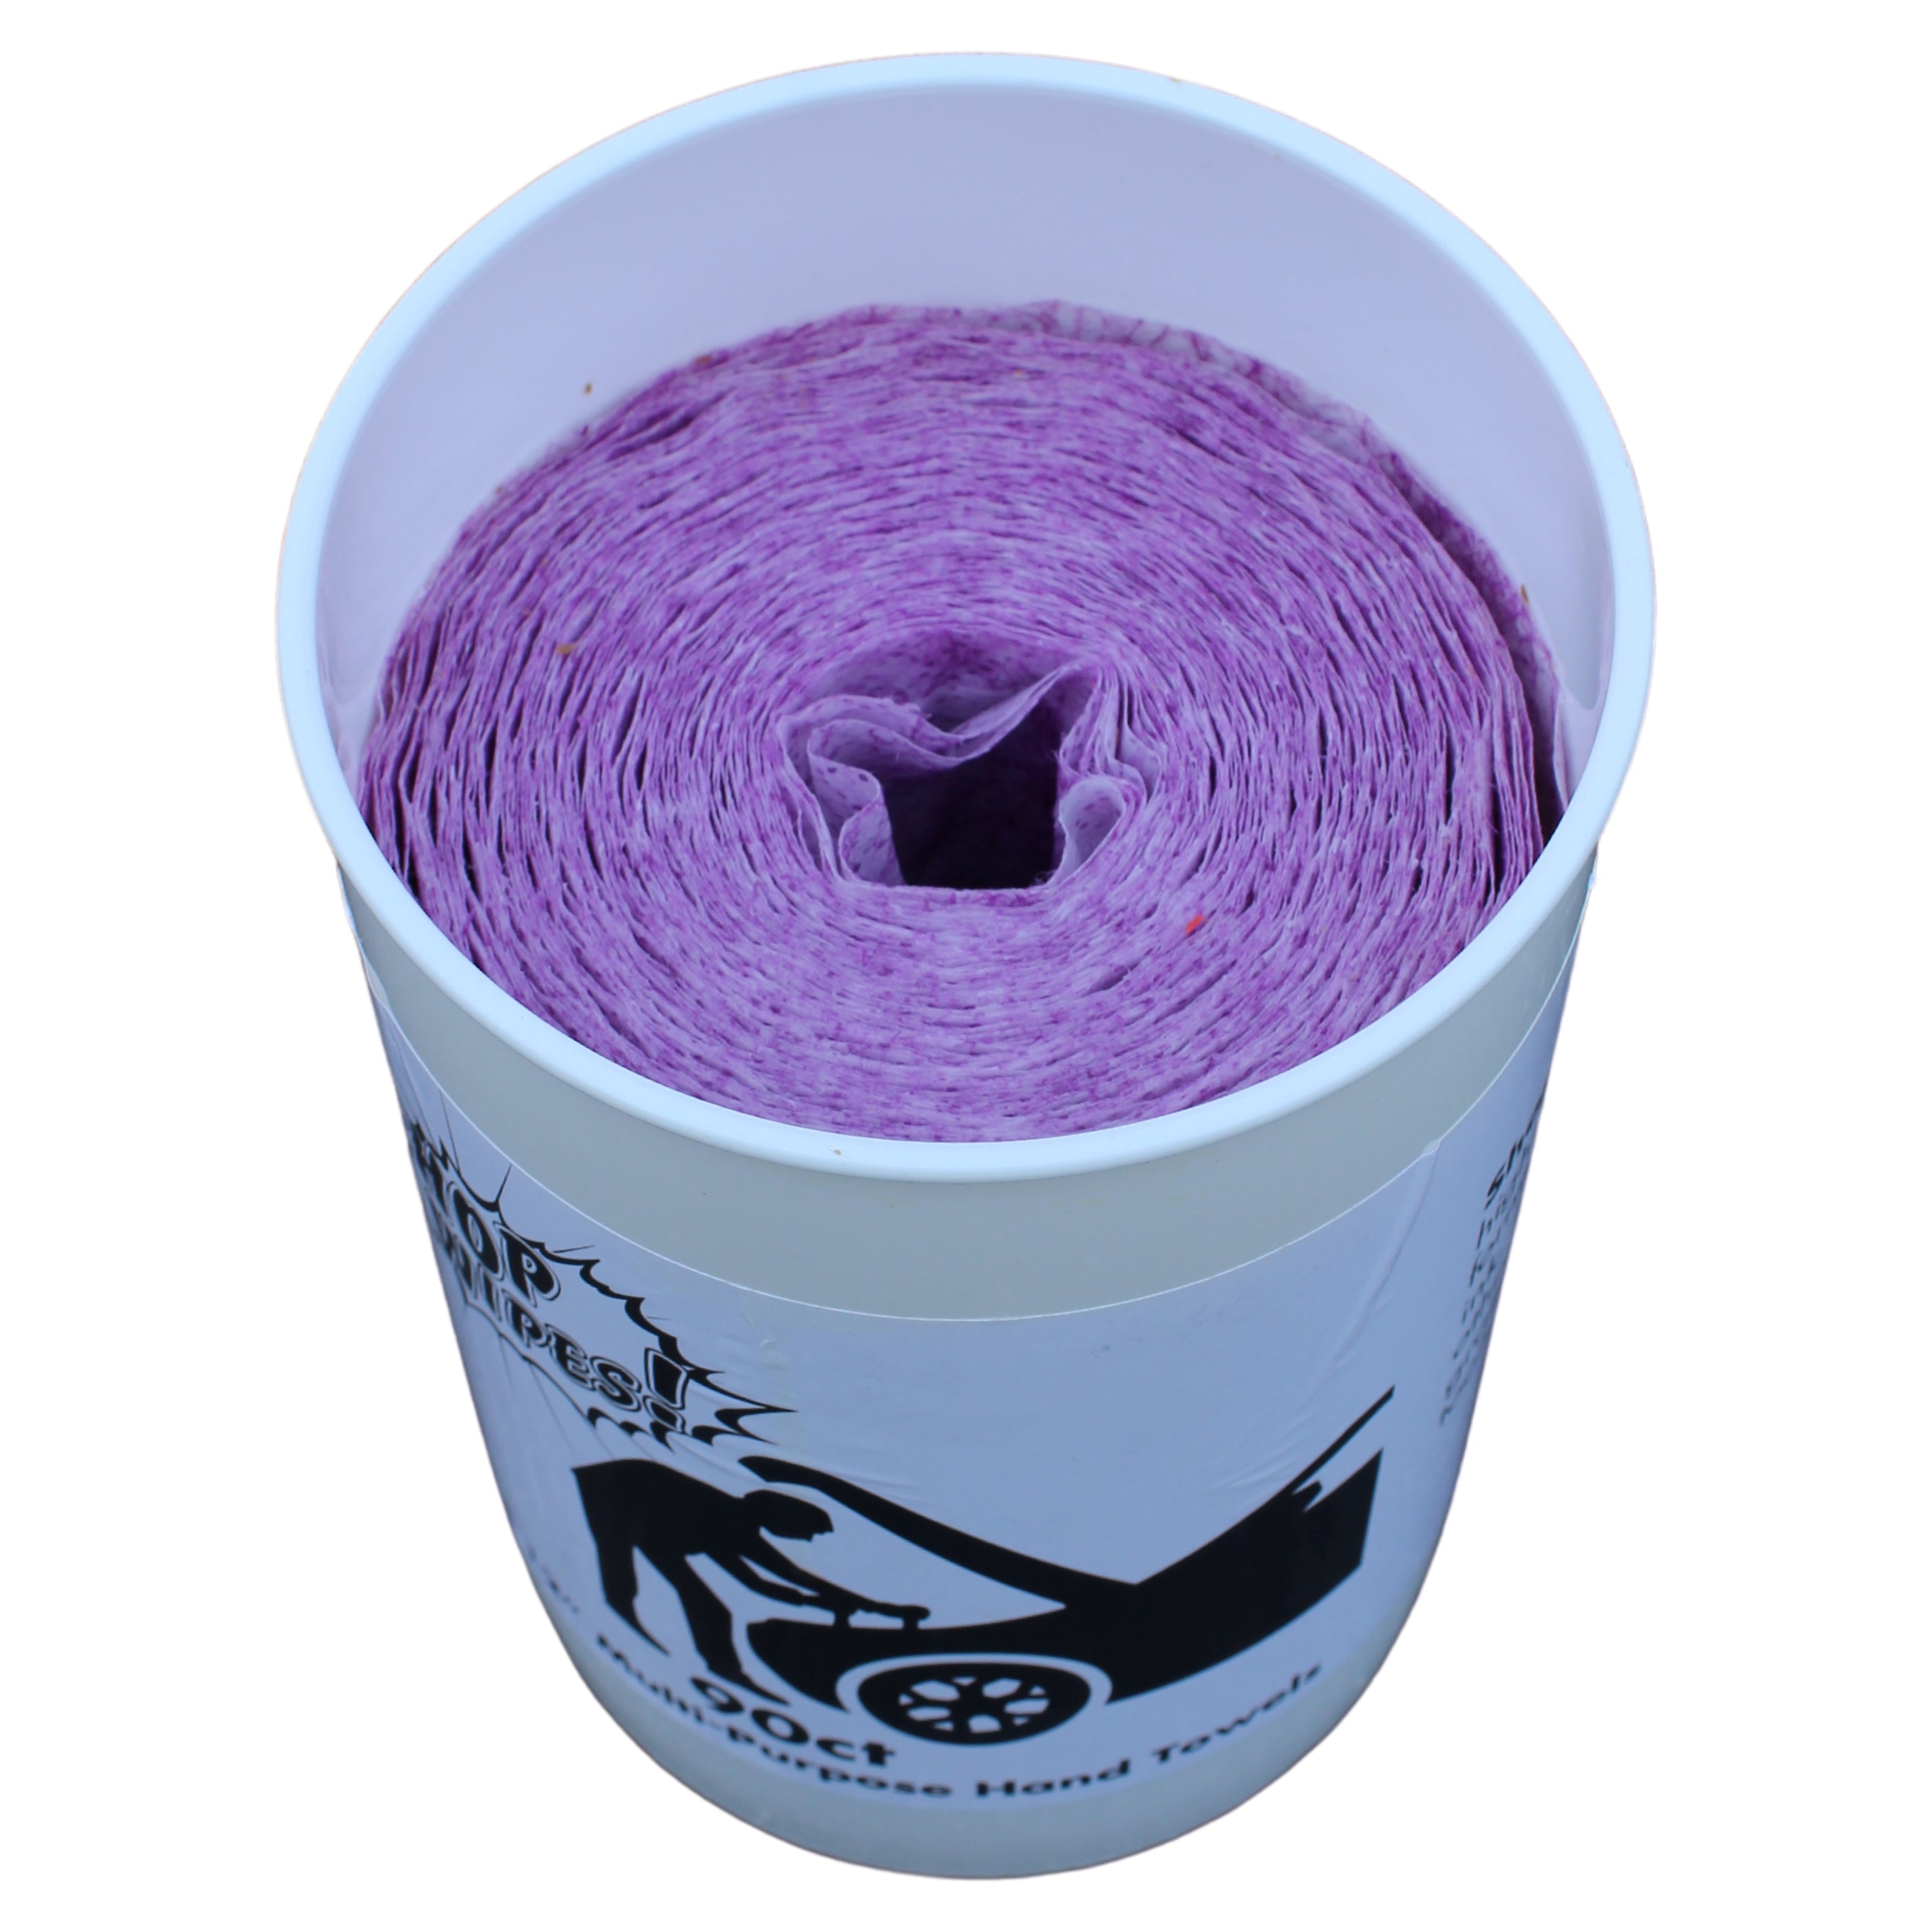 Degreasing Wipes - Better Cleaning Better Value.